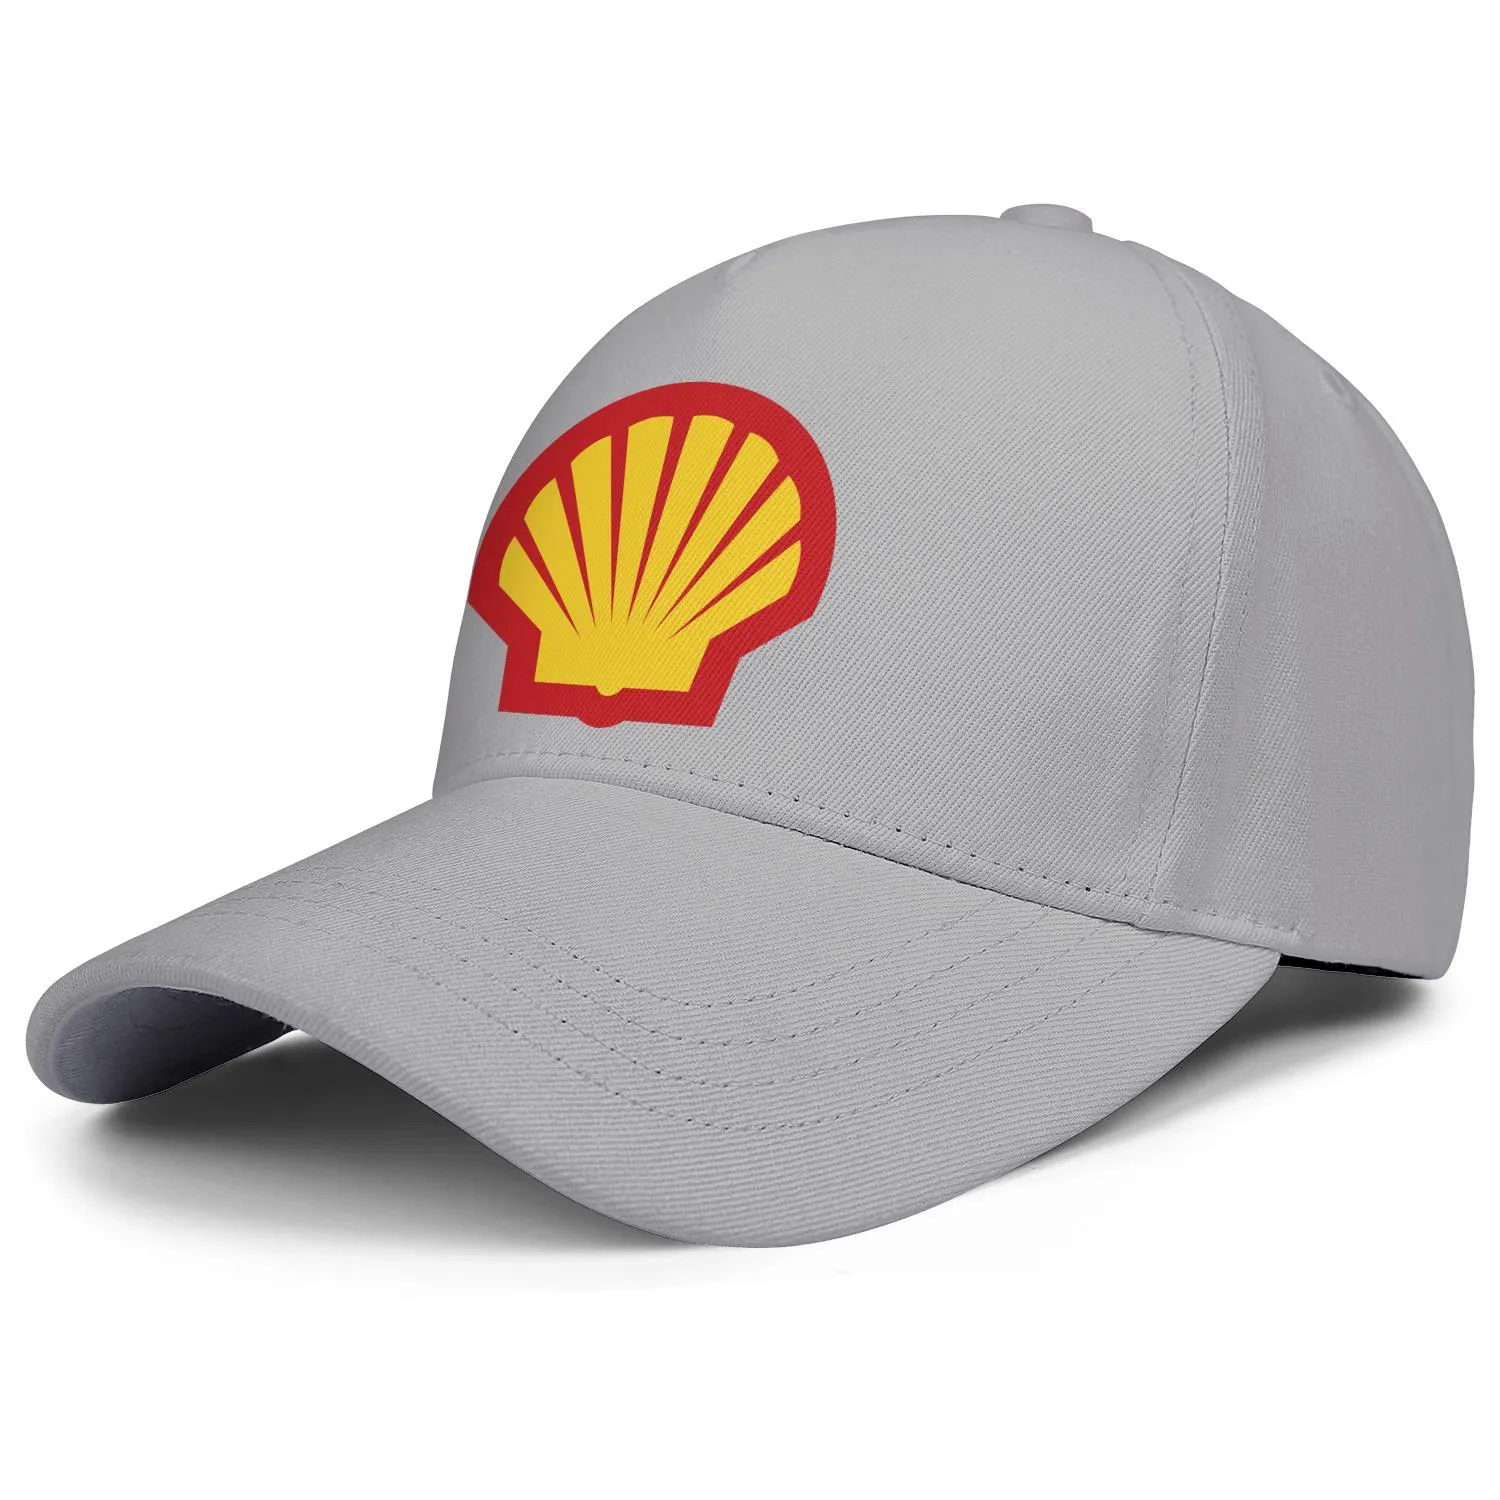 Shell gasoline gas station logo mens and women adjustable trucker cap fitted vintage cute baseballhats locator Gasoline symbo3892911